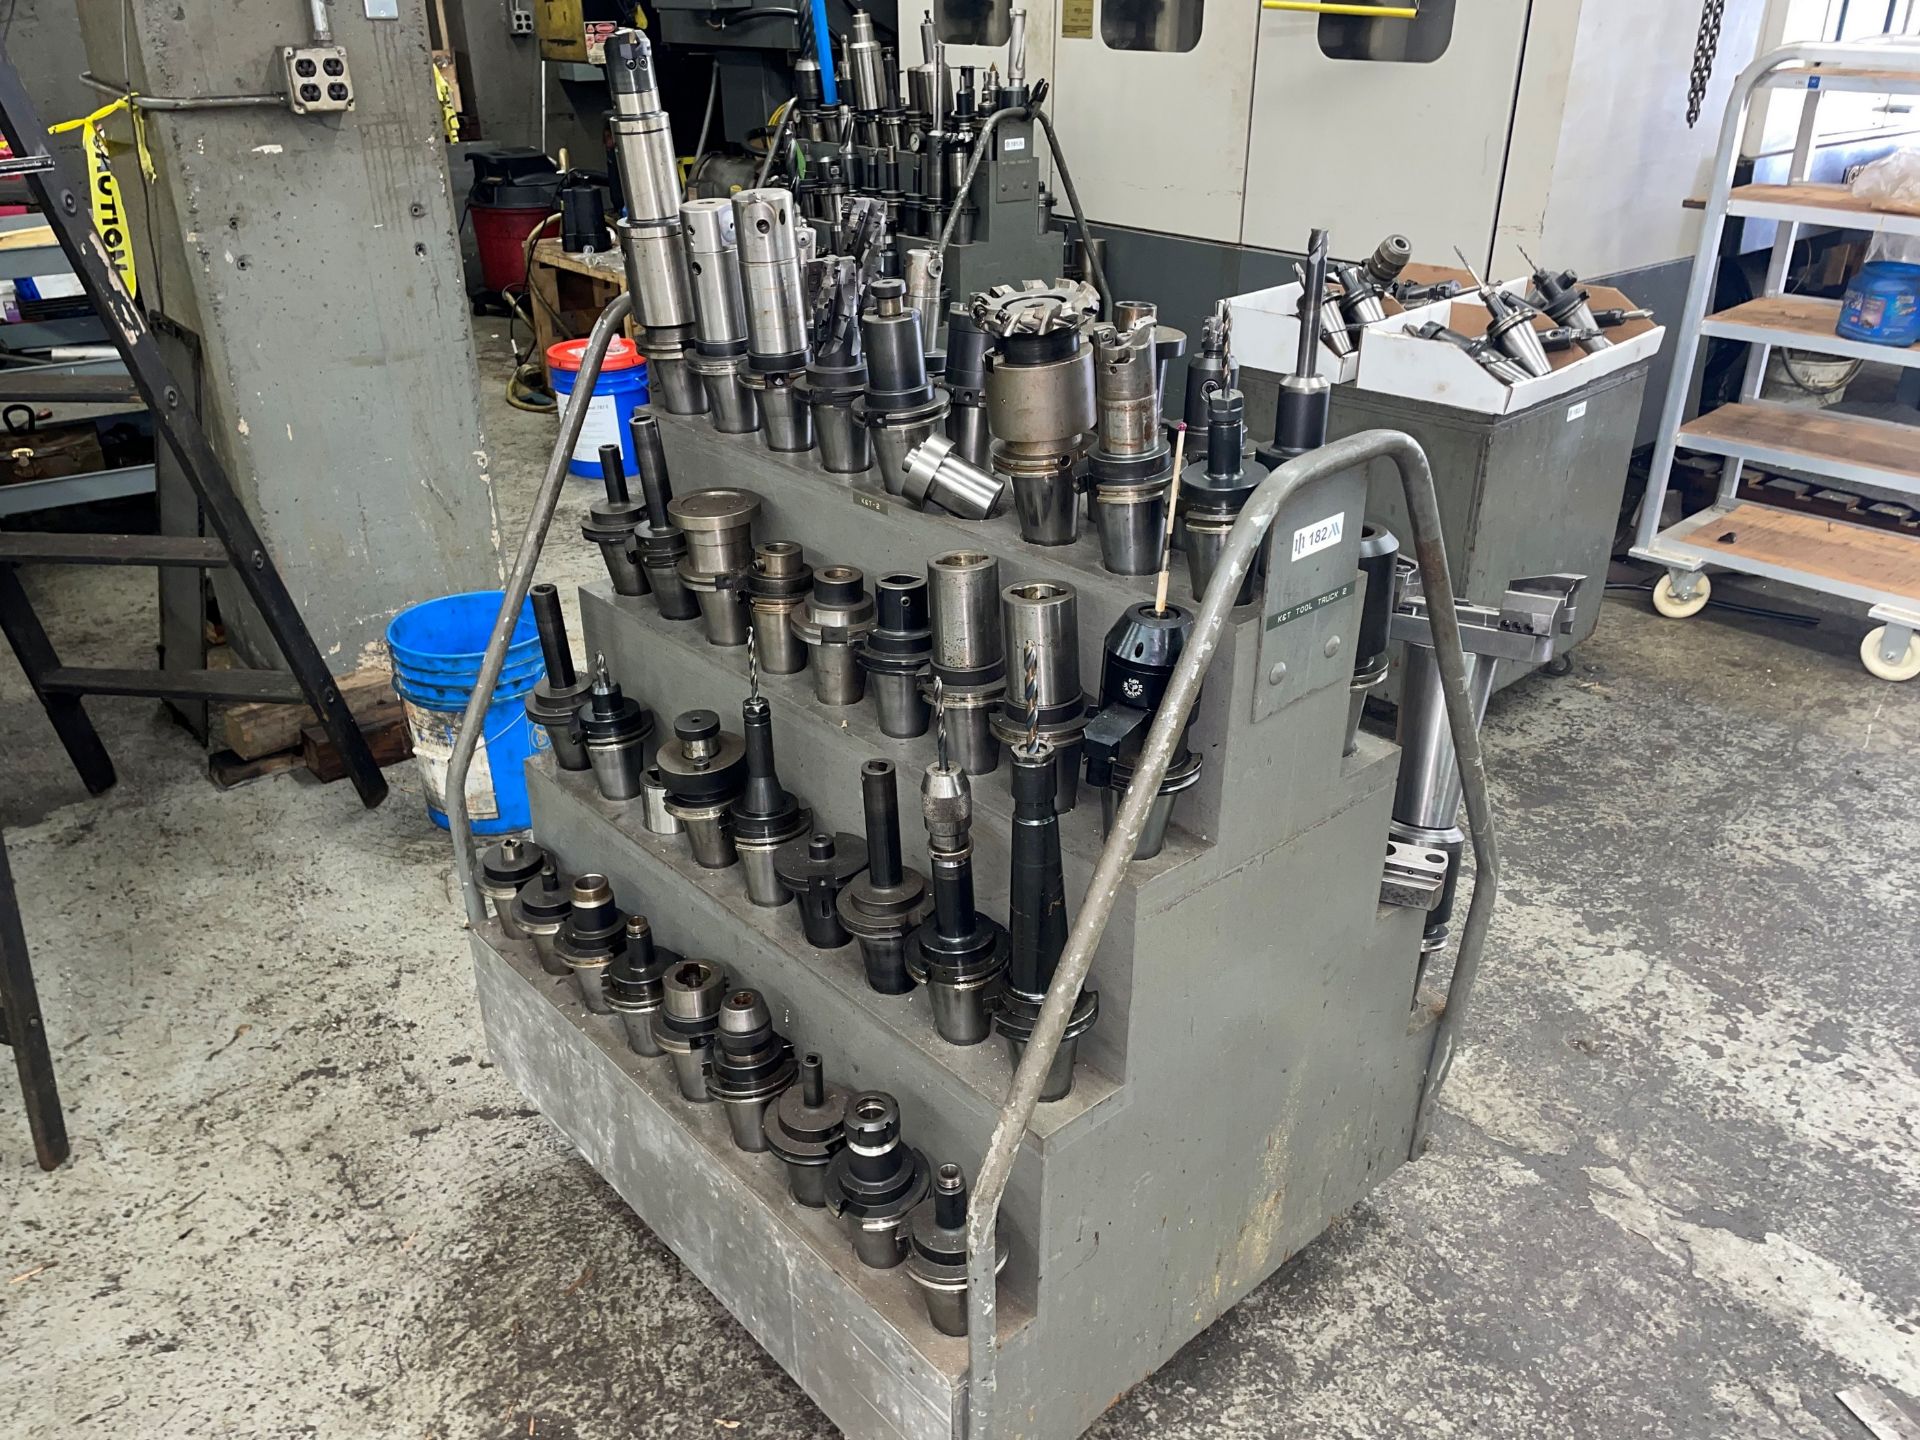 CAT 50 Tooling Cart with Approximately 60 Tool Holders